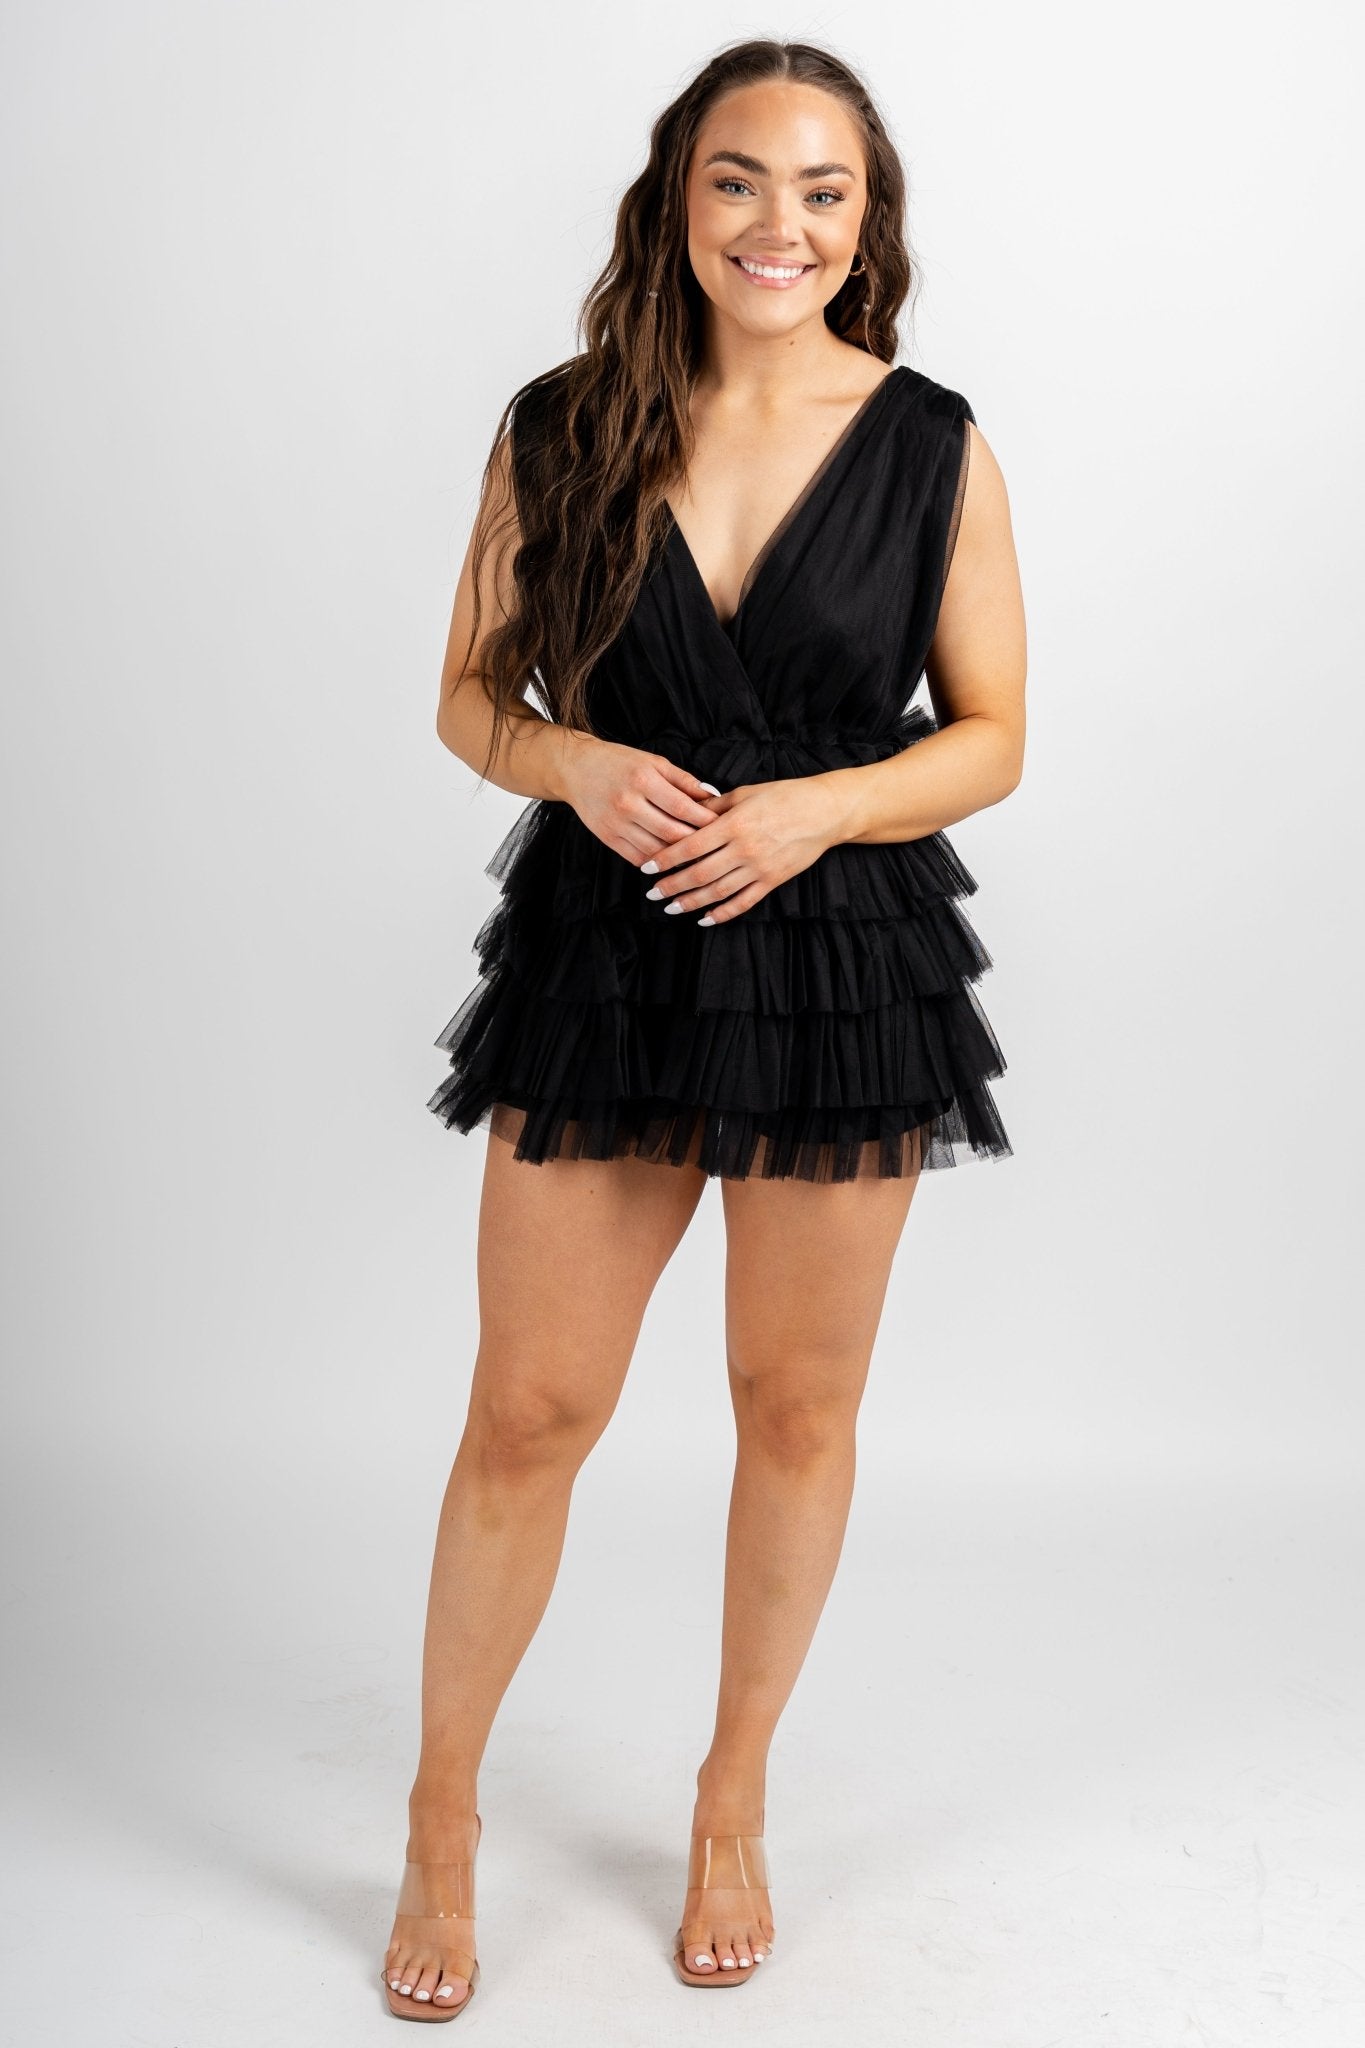 Tulle deep v romper black - Trendy Romper - Fashion Rompers & Pantsuits at Lush Fashion Lounge Boutique in Oklahoma City